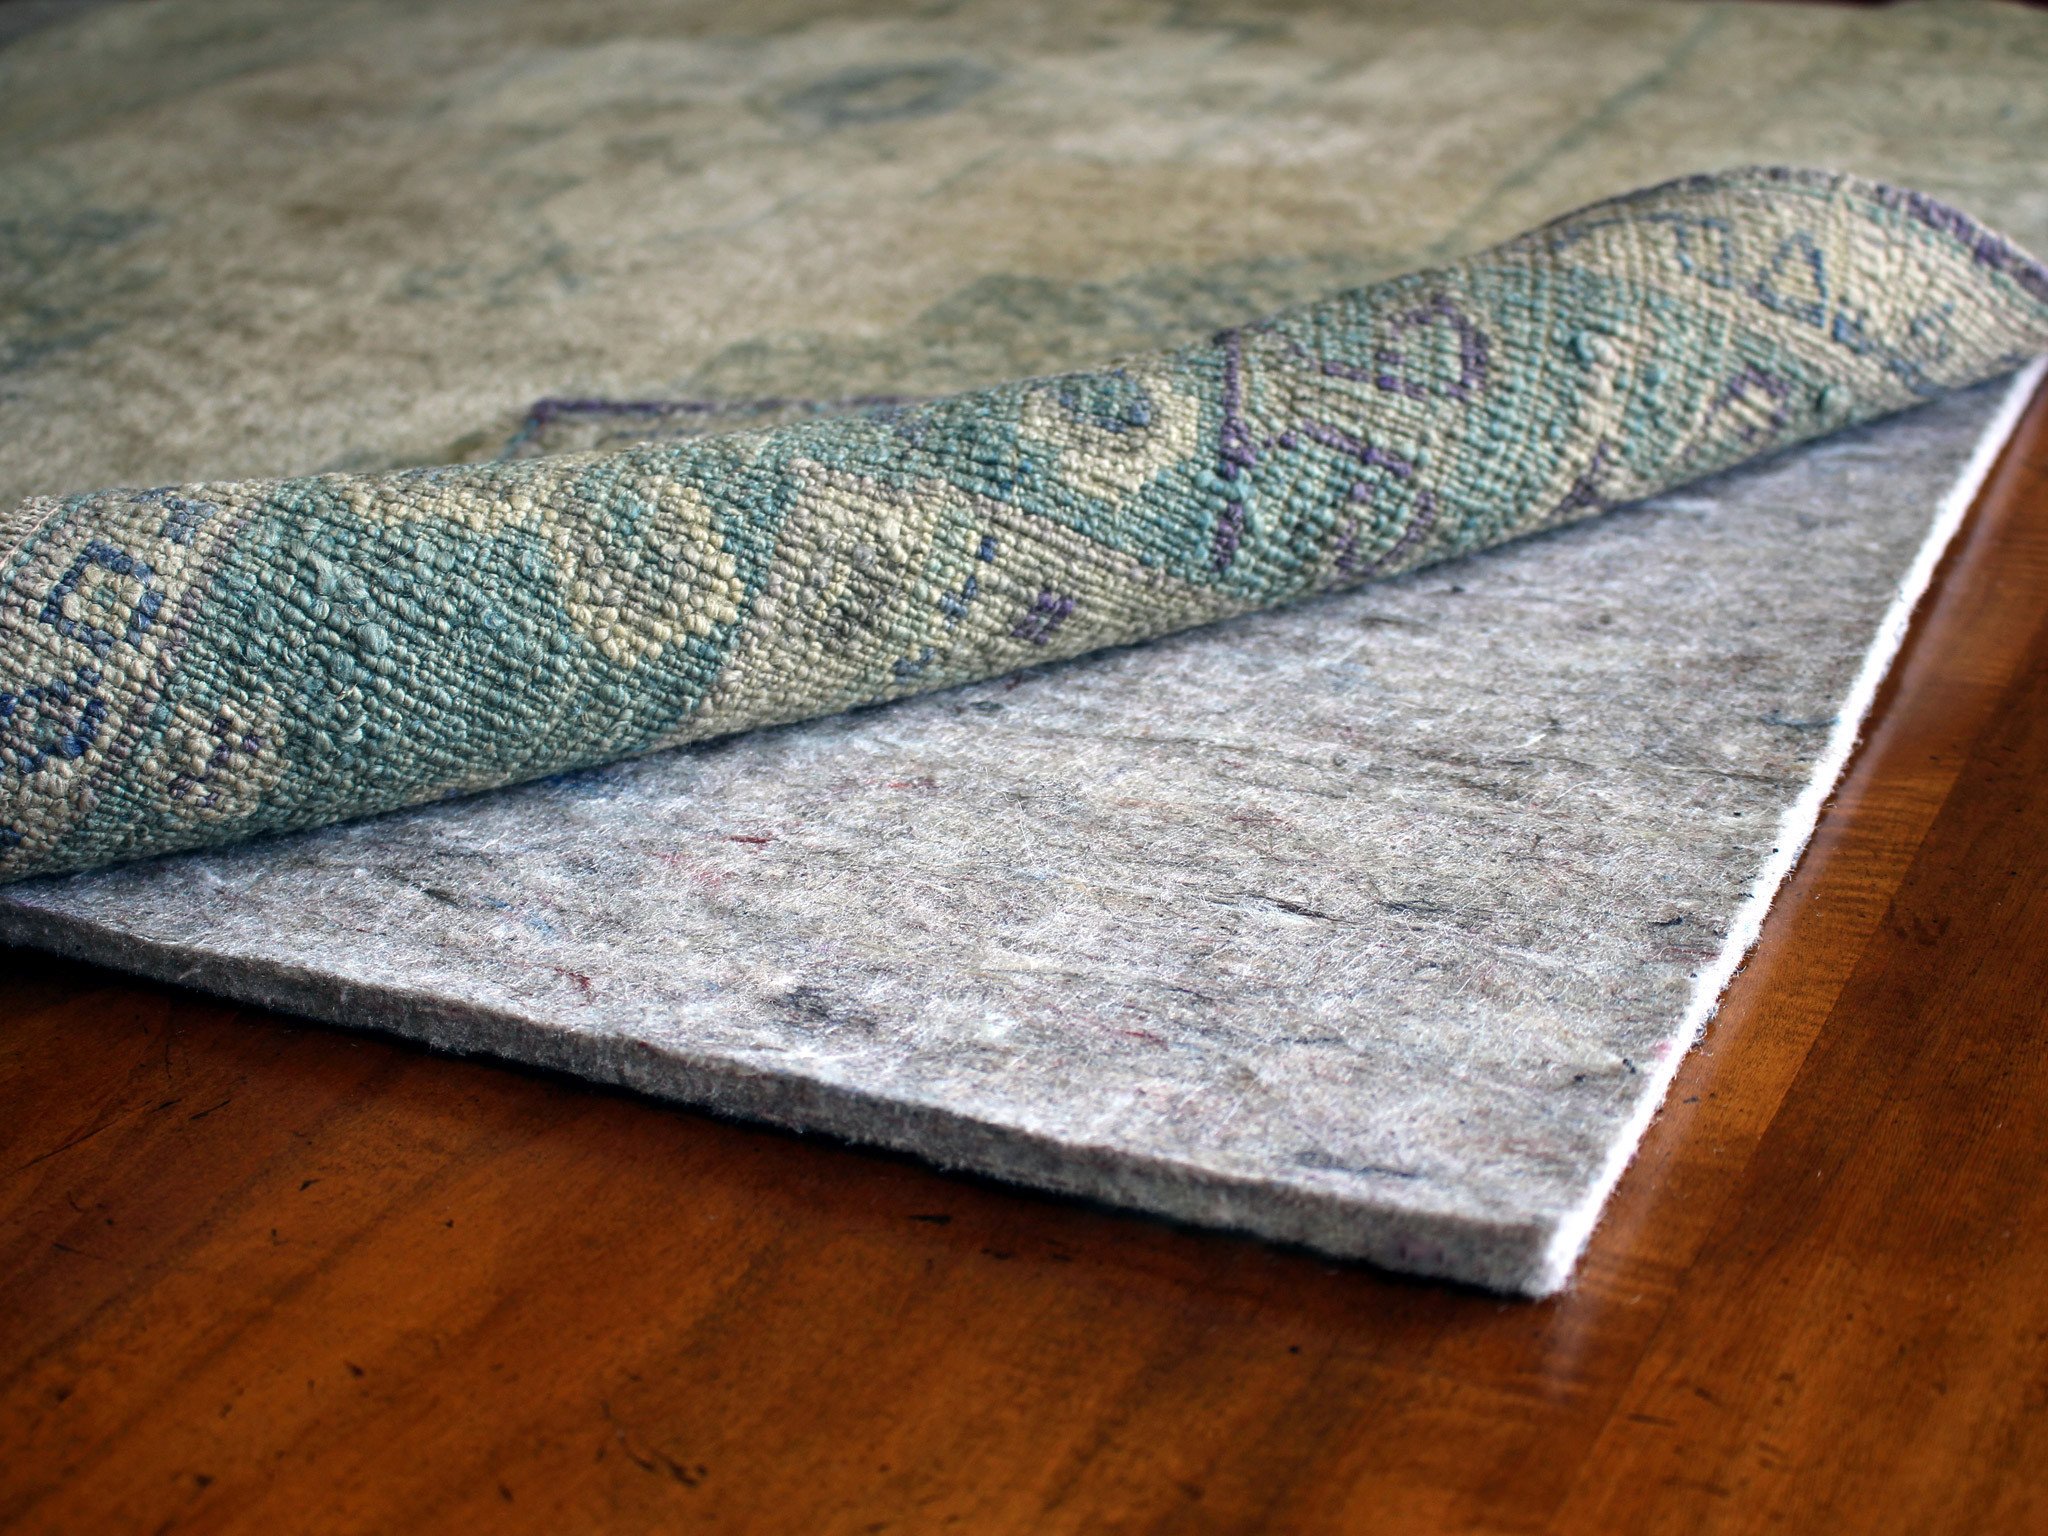 RUGPADUSA - Superior-Lock - 4'x6' - 7/16" Thick - Felt + Rubber - Luxury Non-Slip Rug Pad - Perfect for Hardwood Floors, Available in 2 Thicknesses, Many Custom Sizes - image 8 of 8